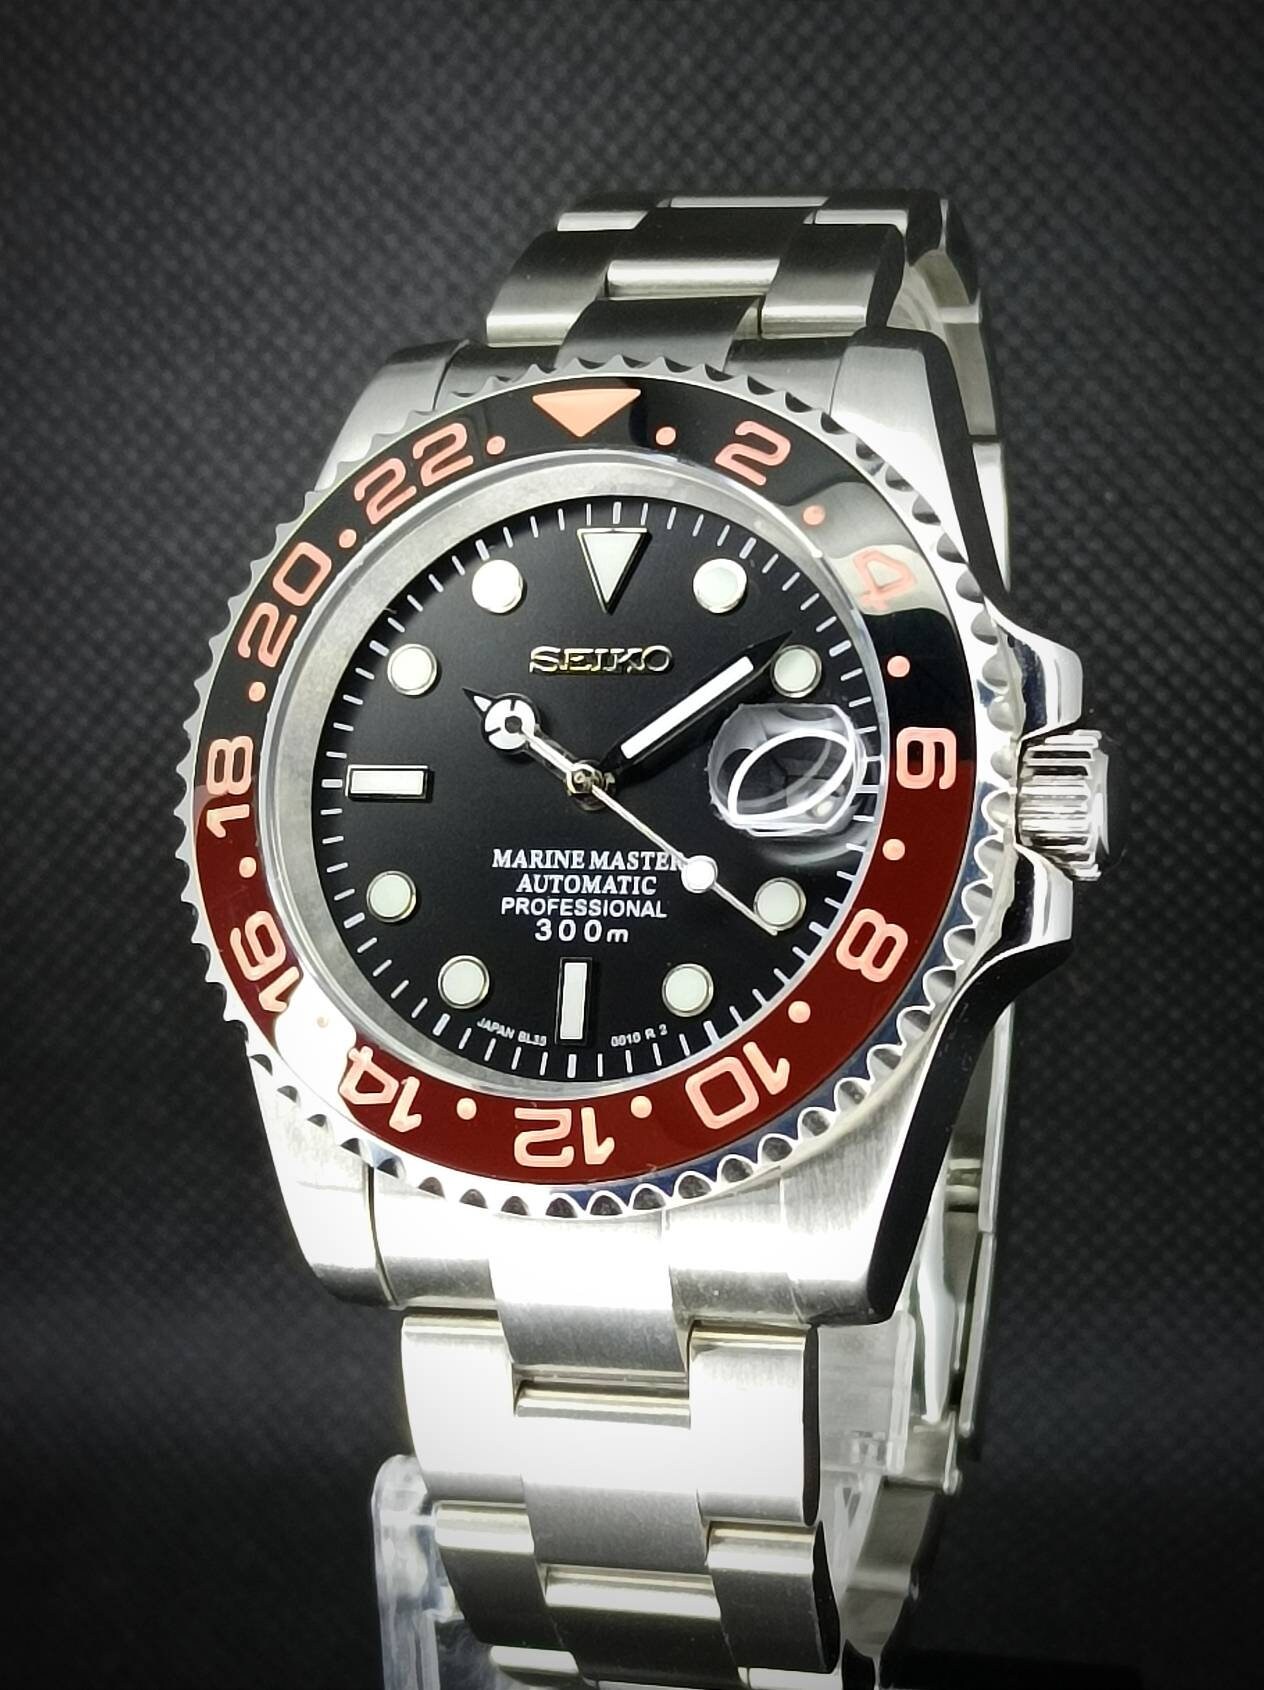 Seiko Mod Submariner Root Beer Tribute Diver Automatic GMT - Etsy